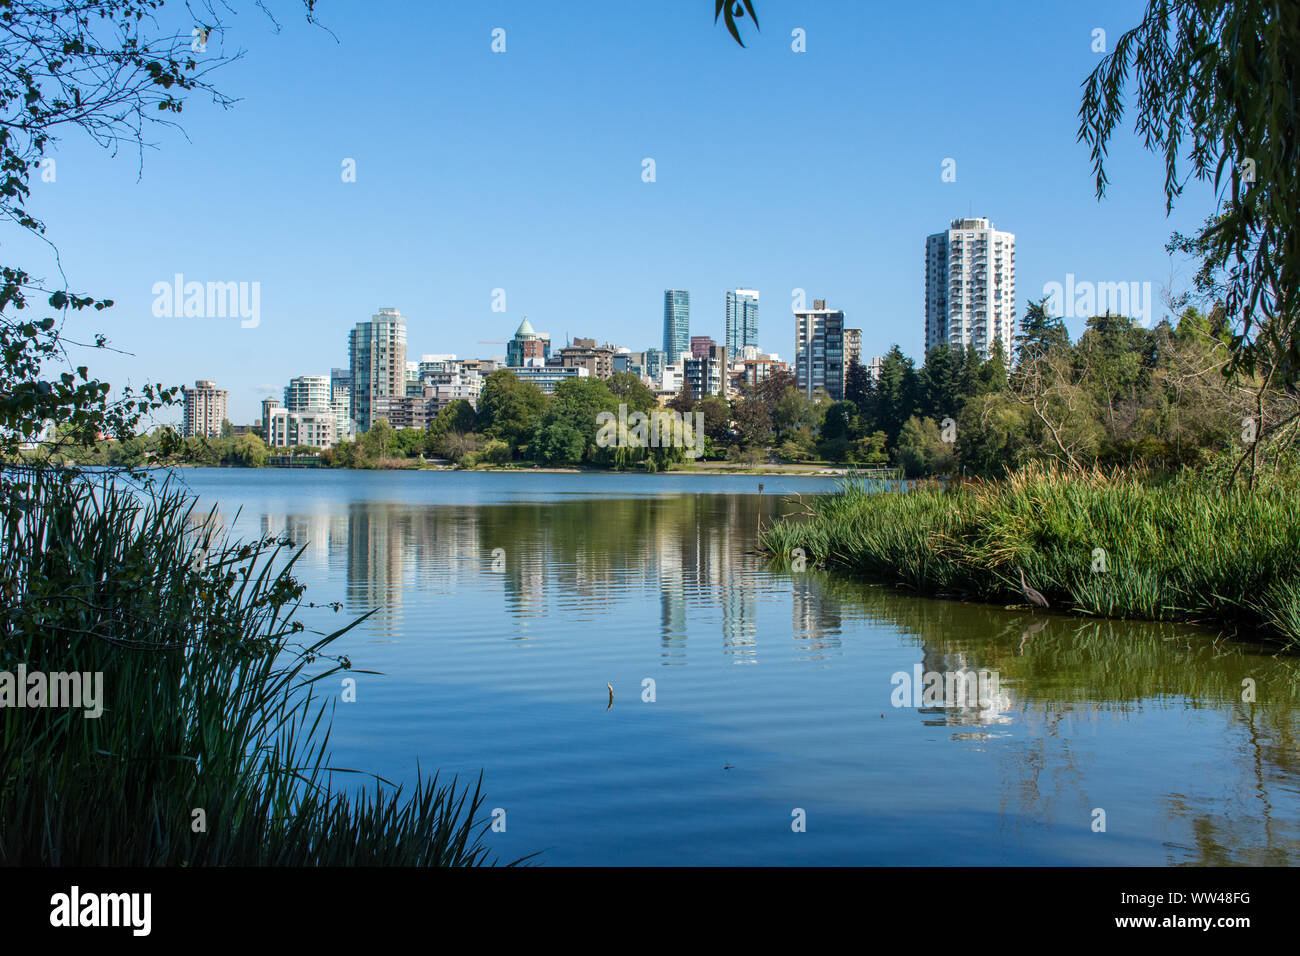 Lost Lagoon in Stanley Park in Vancouver, British Columbia, Canada looking towards downtown urban apartments near the beautiful summer nature. Stock Photo